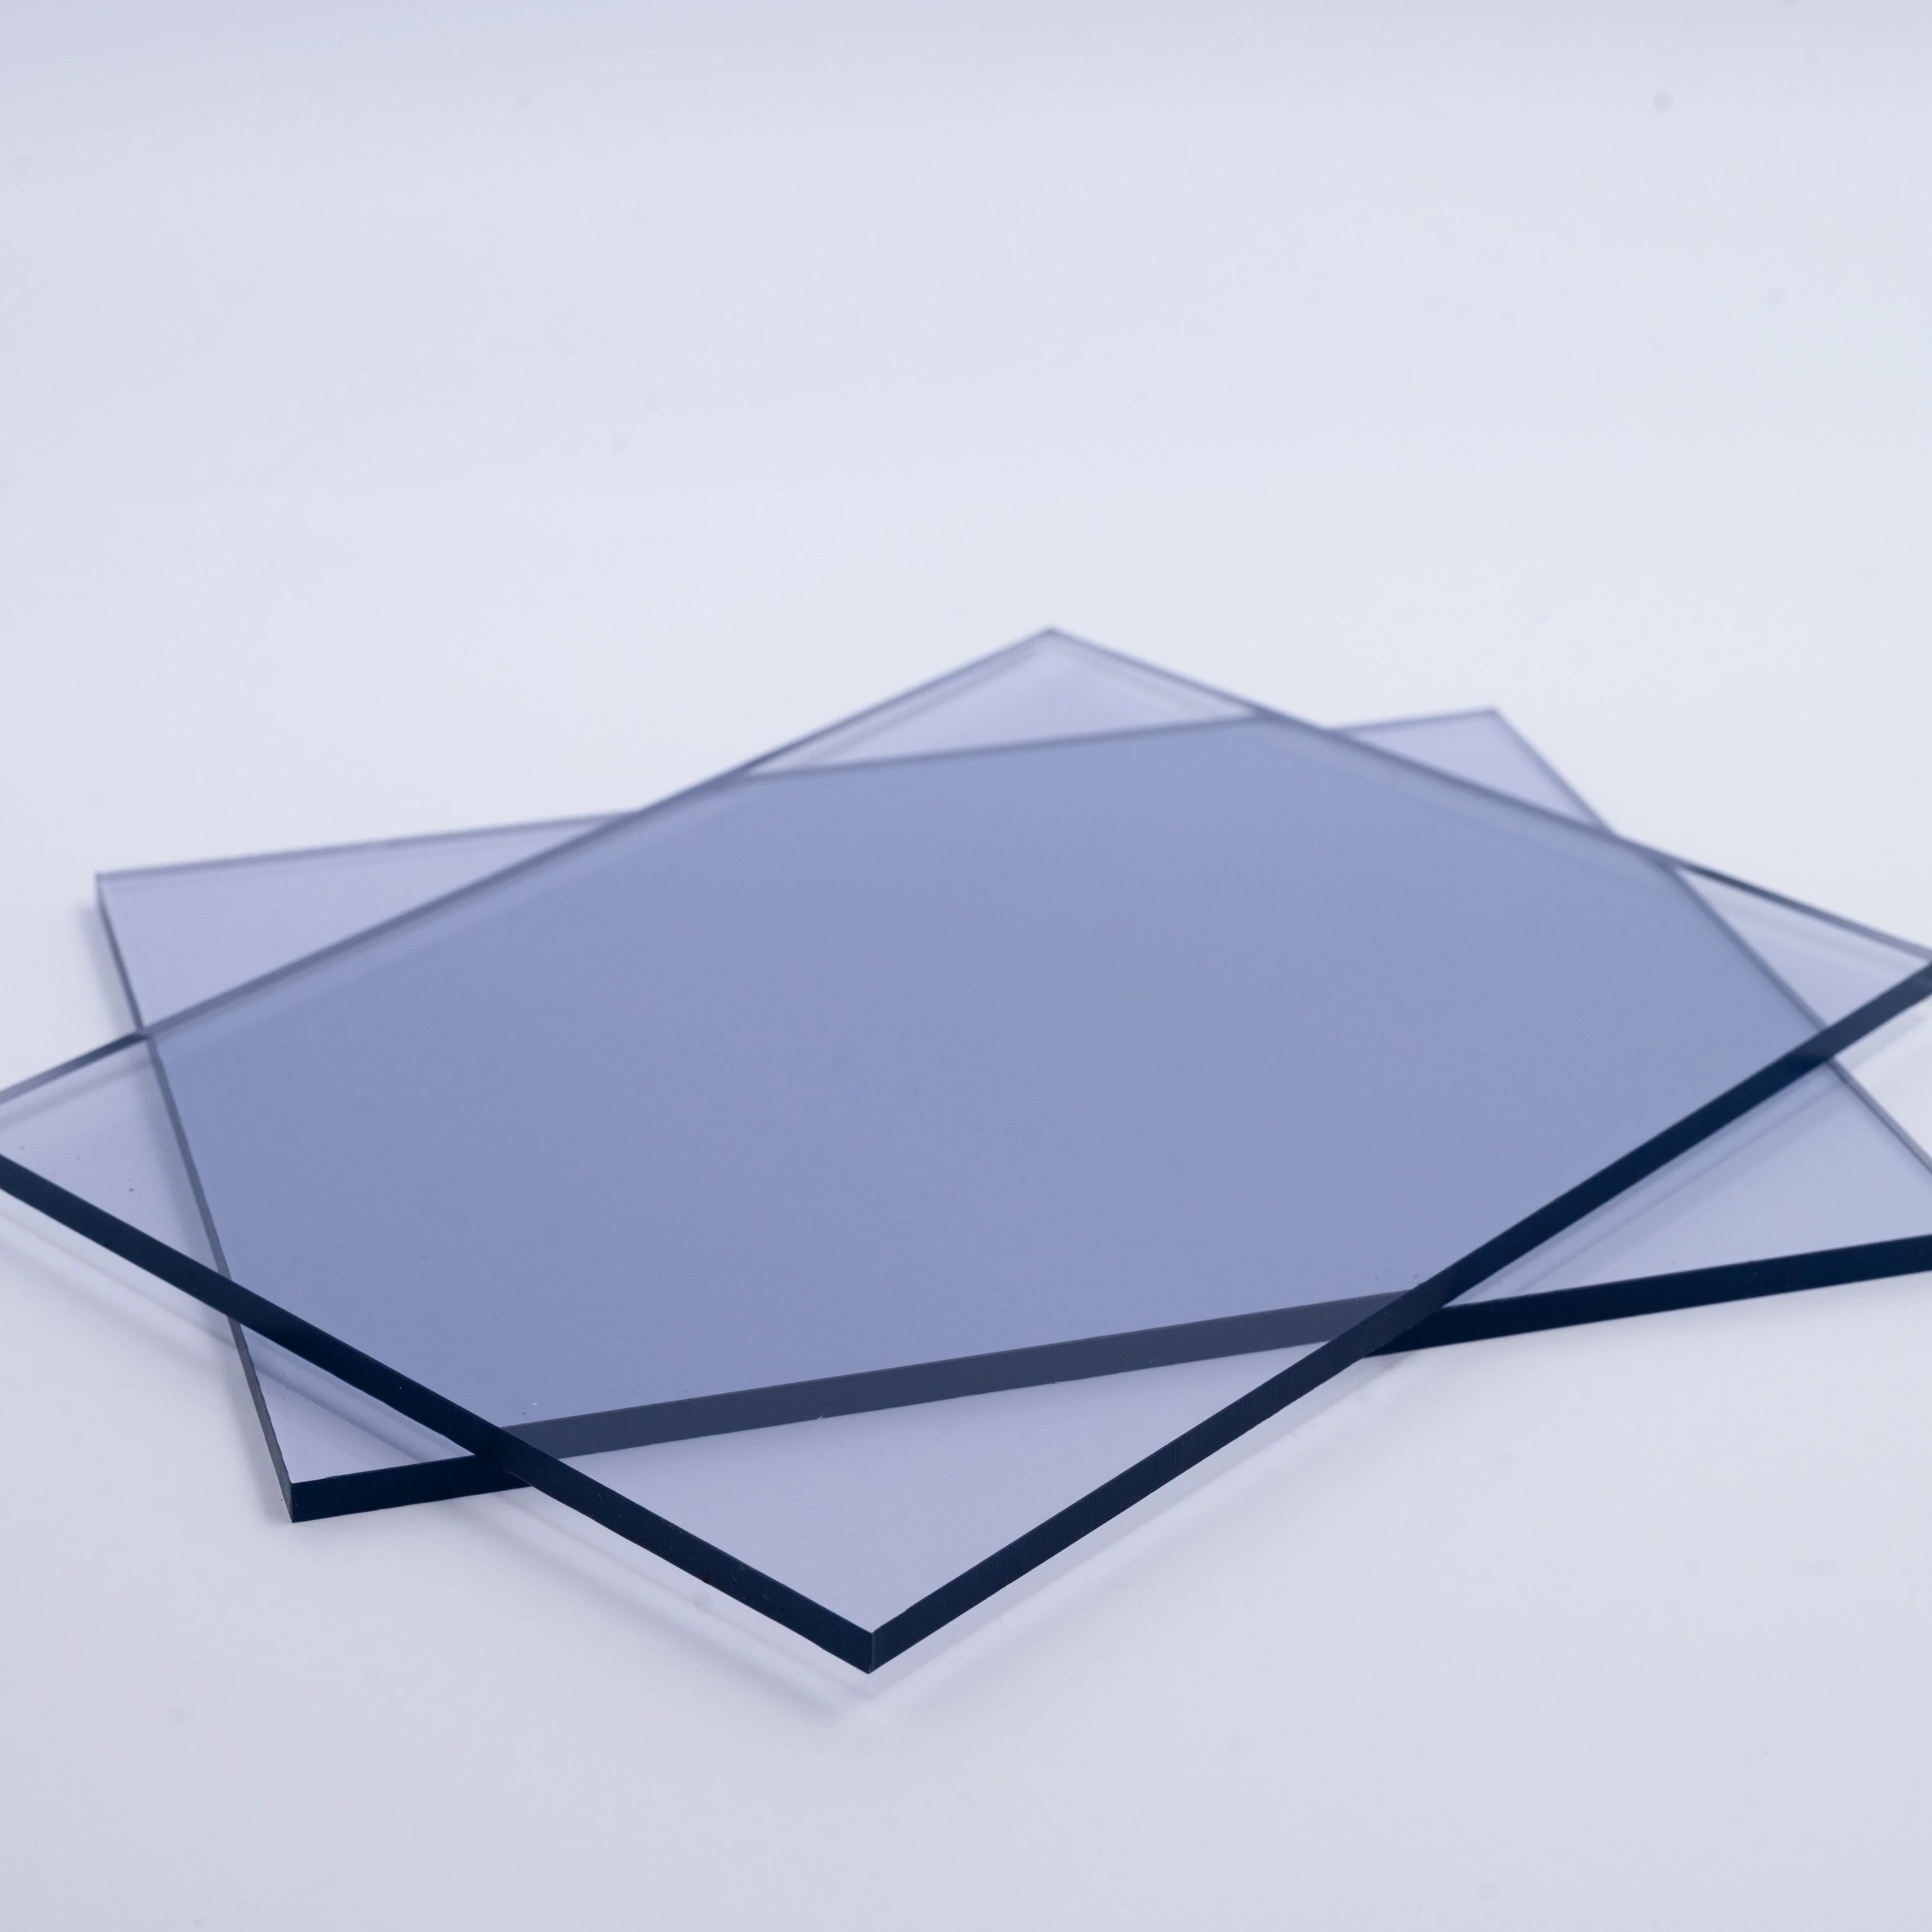 Andisco Quality Supplier 5mm Clear Transparent Rigid PVC Sheet Hard Surface Perspex Panels CNC Machining Cutting Bending